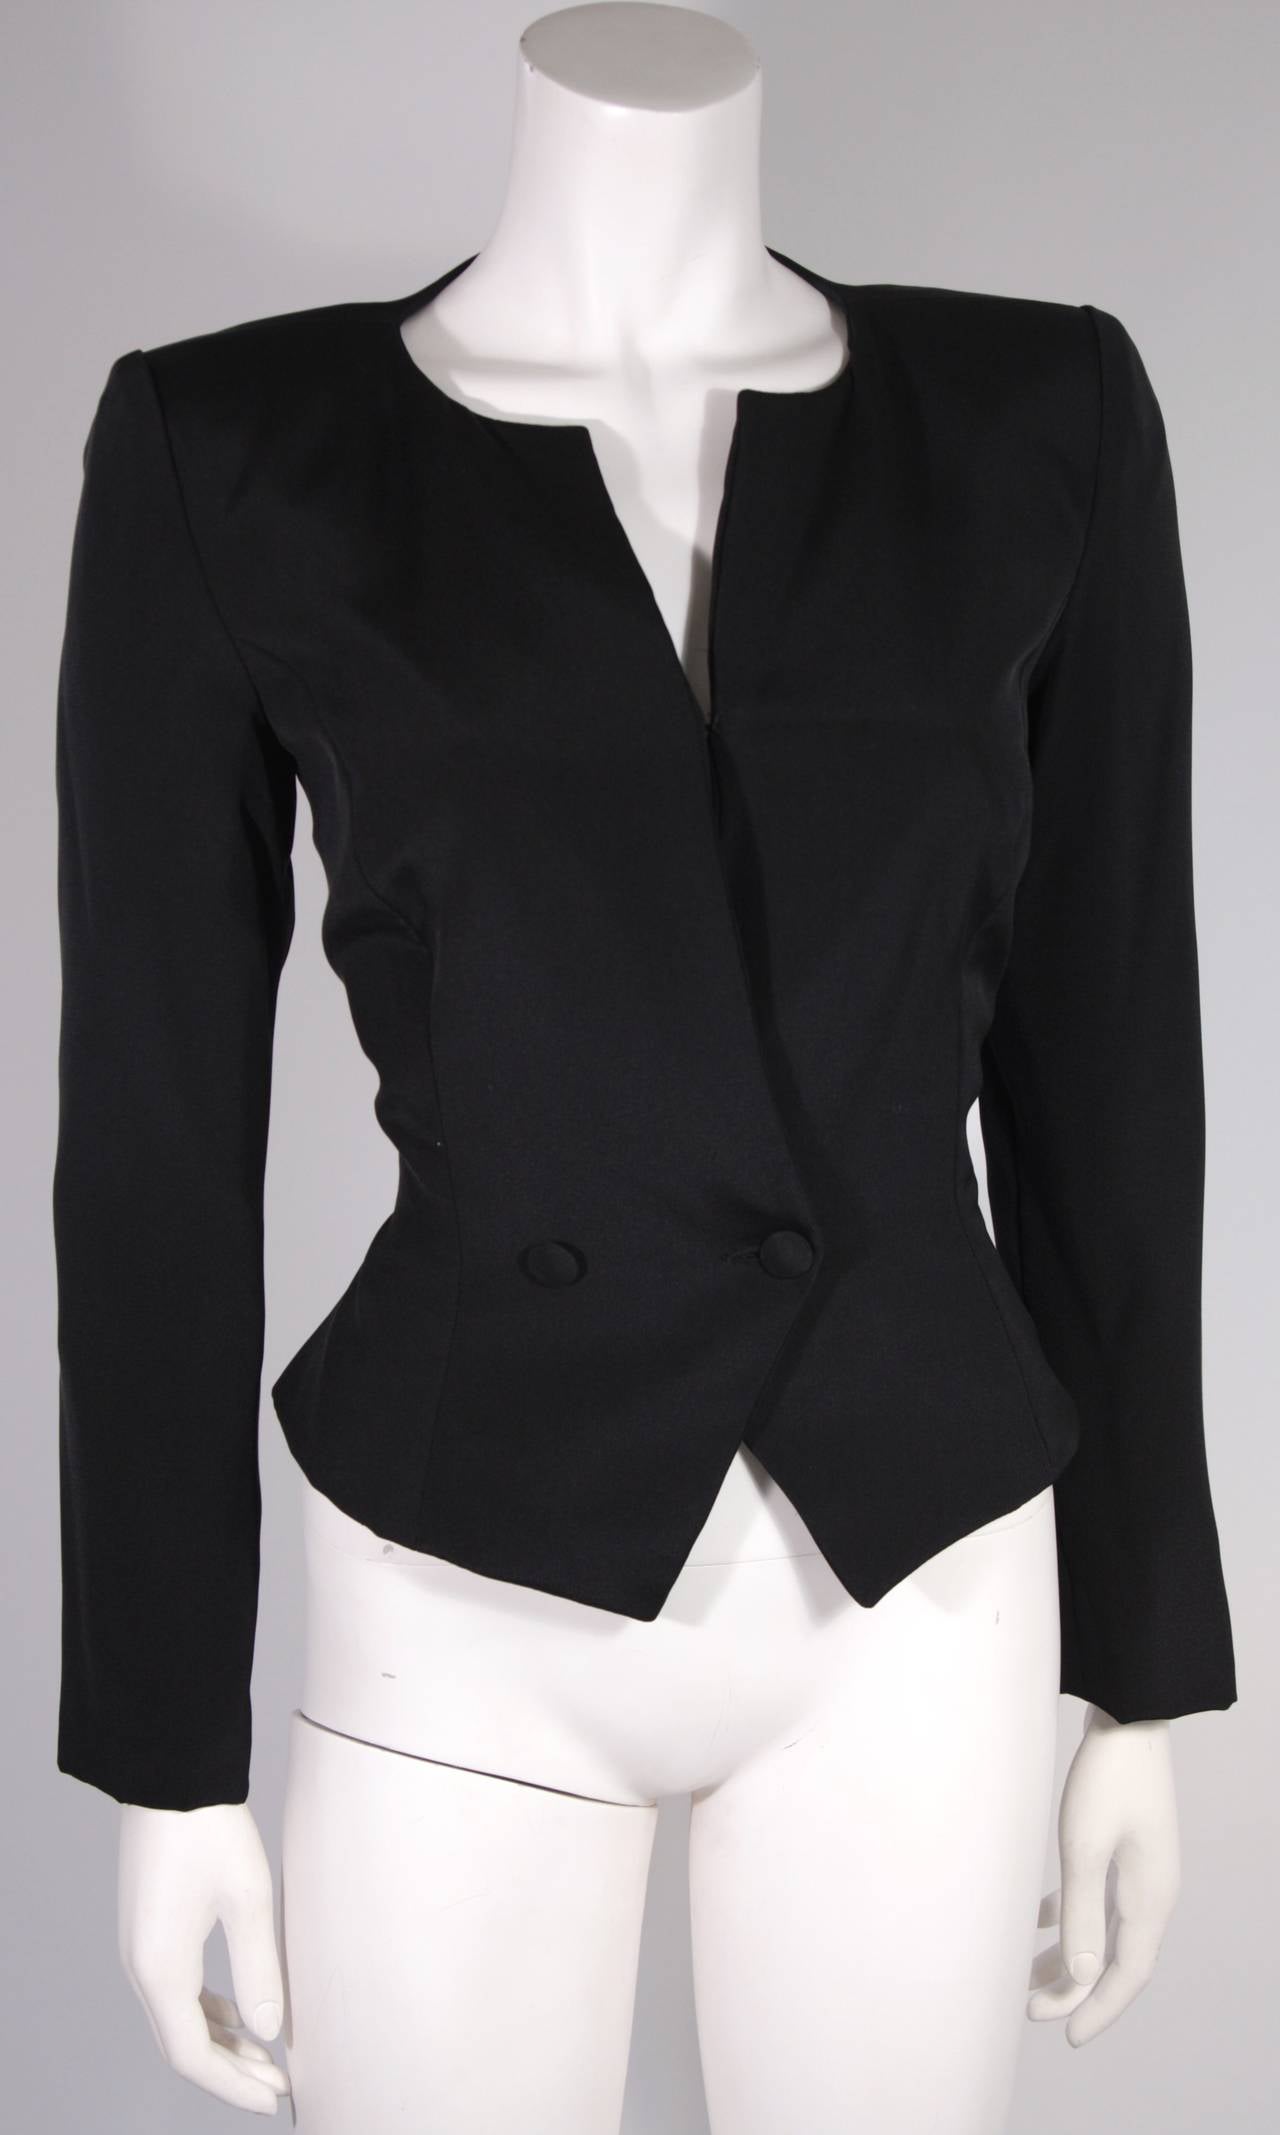 This is a Vicky Tiel design. A sophisticated yet sexy garment with a sheer lace back. The jacket features front button closures, as well as a hook and eye closure. Made in France. 

Measures (Approximately)

Length: 23